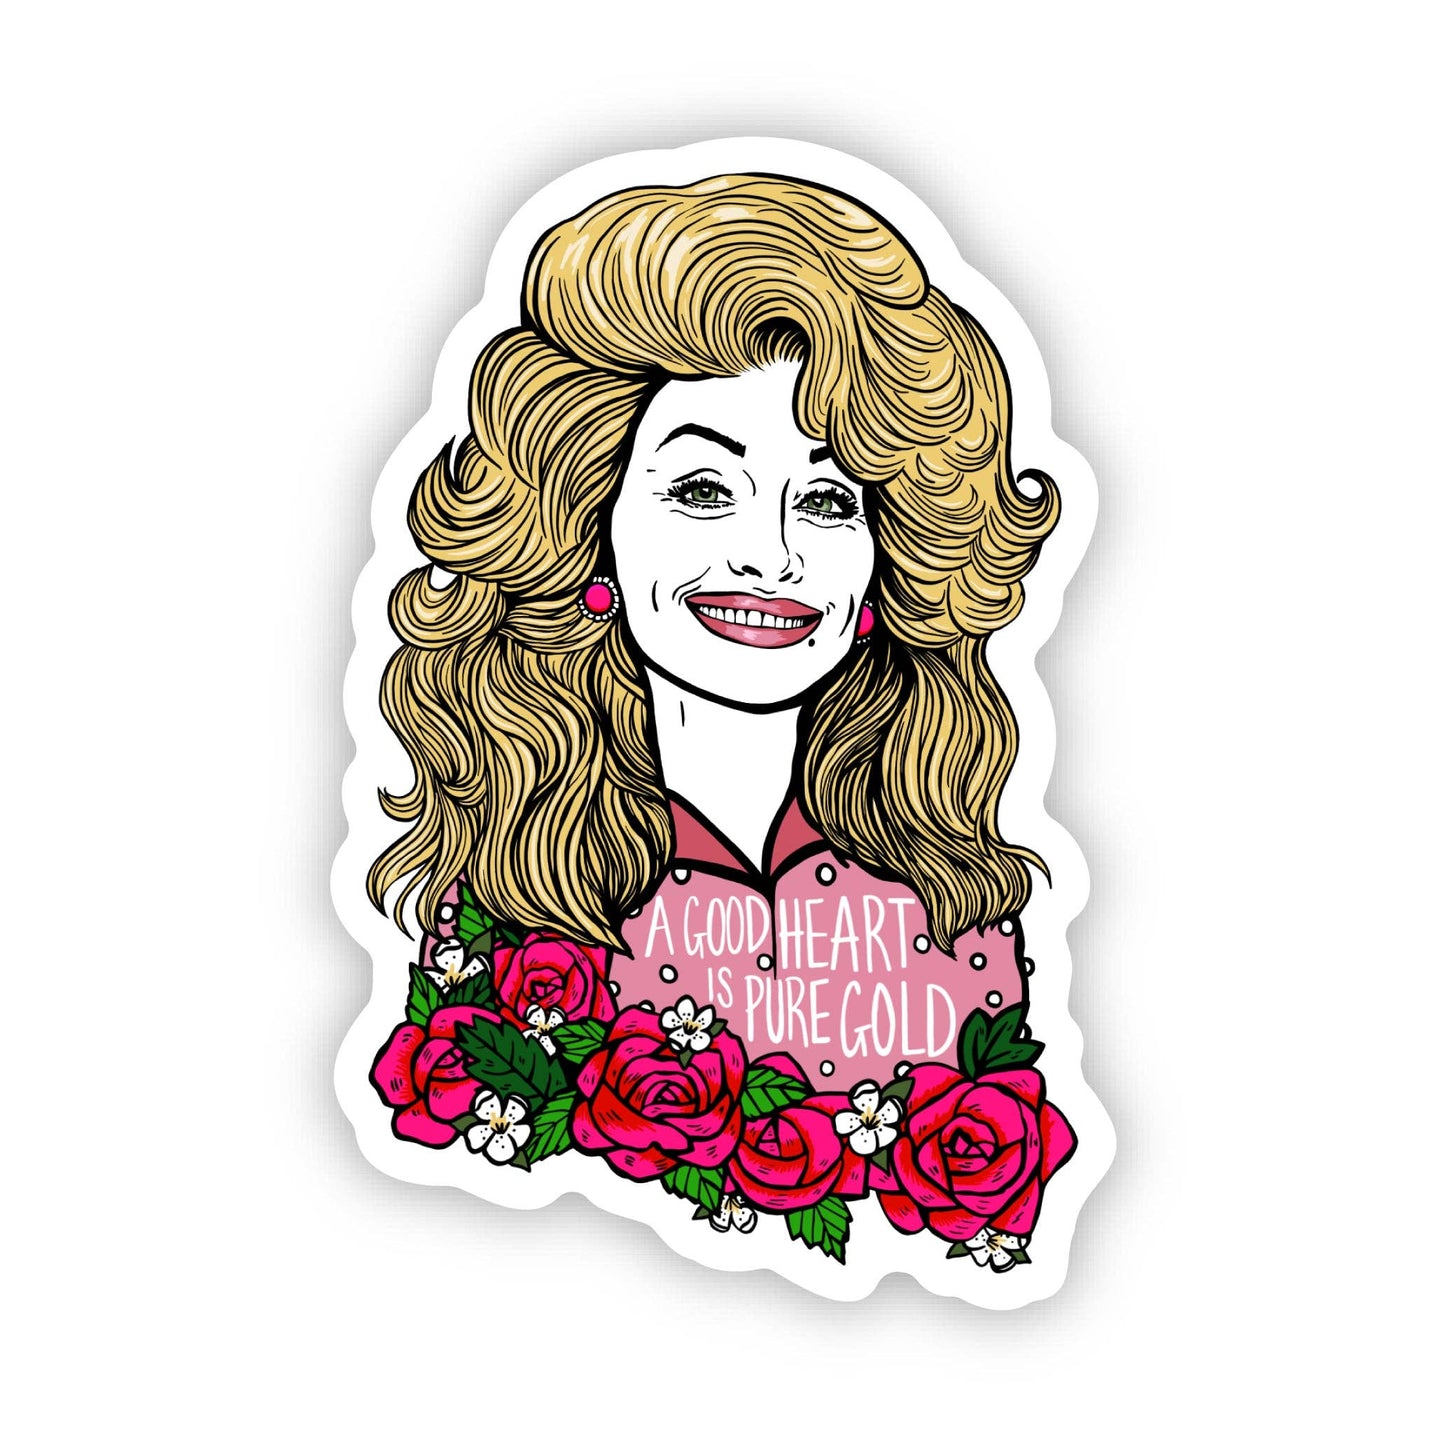 A good heart is pure gold - Dolly sticker